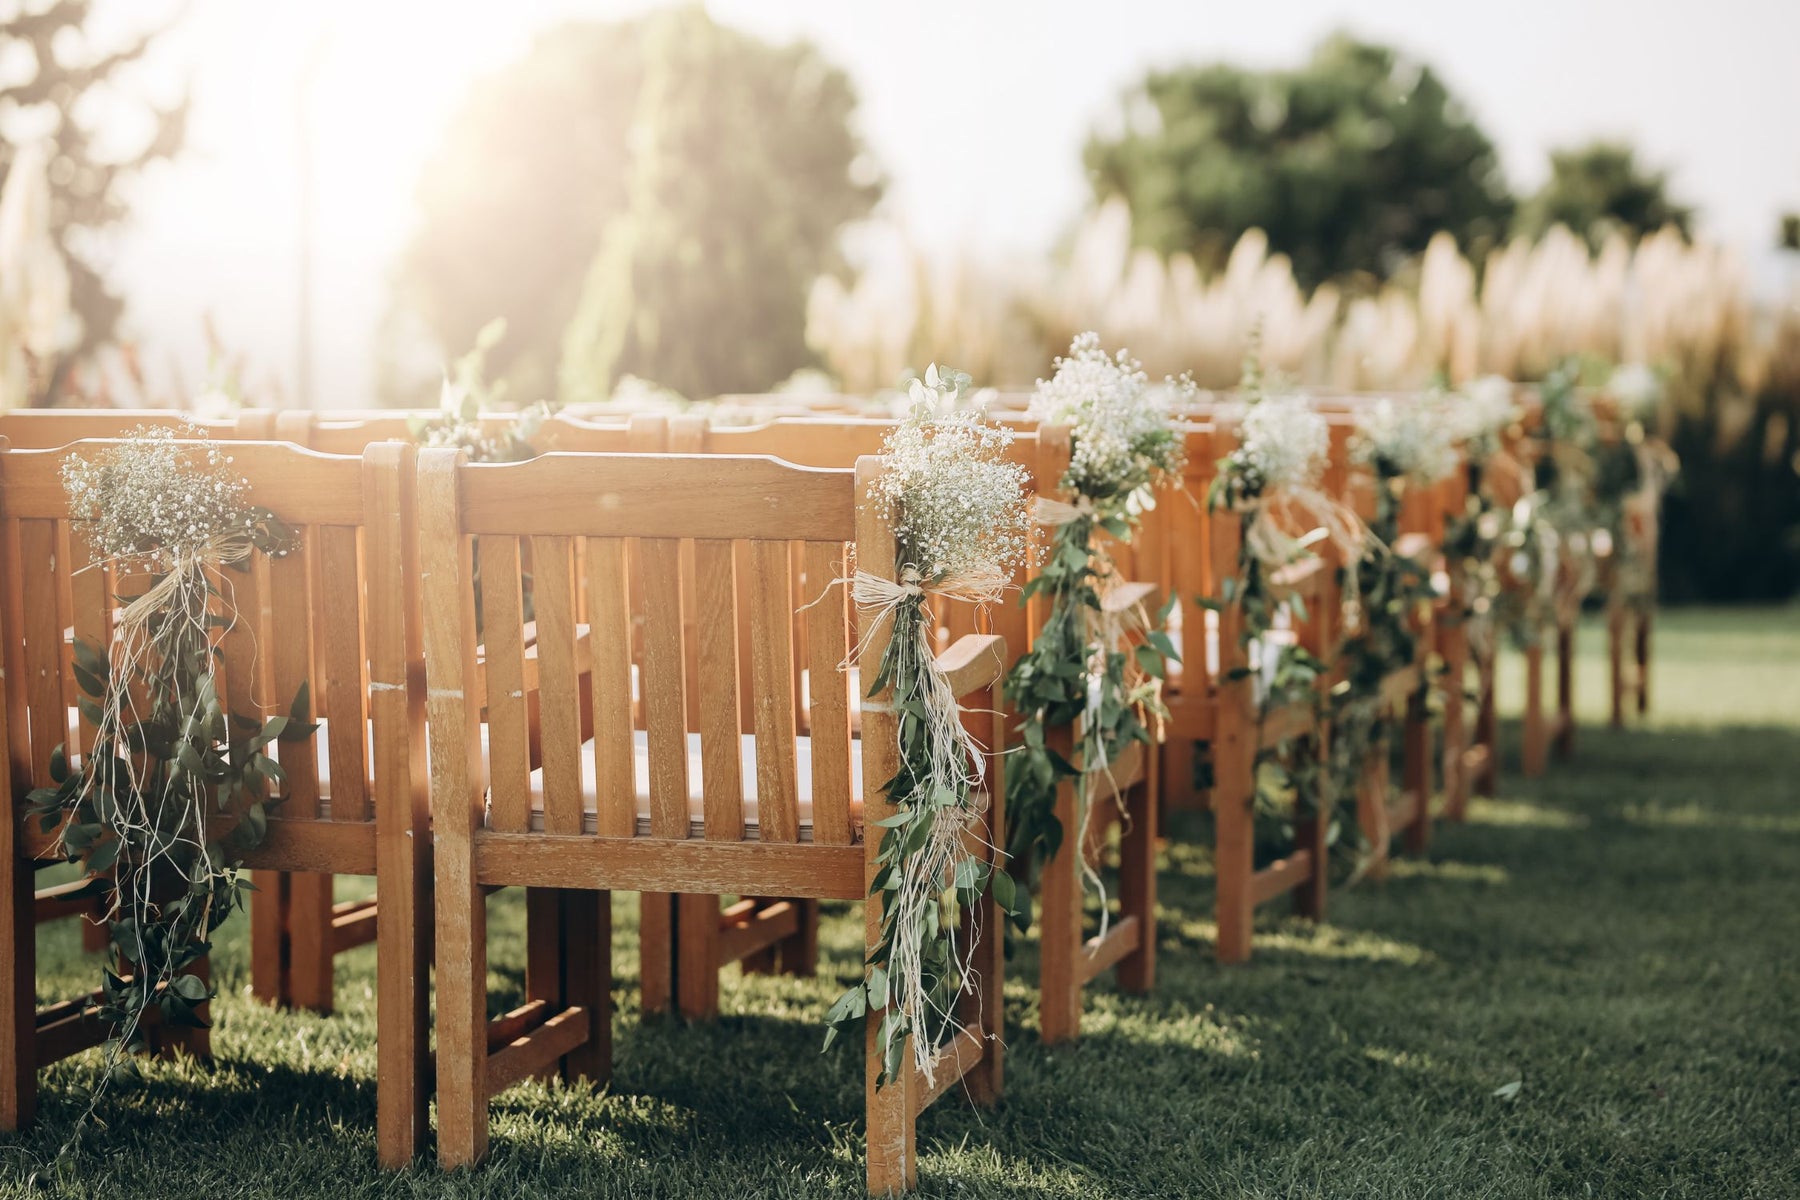 Summer Wedding Trends: 5 Ideas To Try for Your Big Day